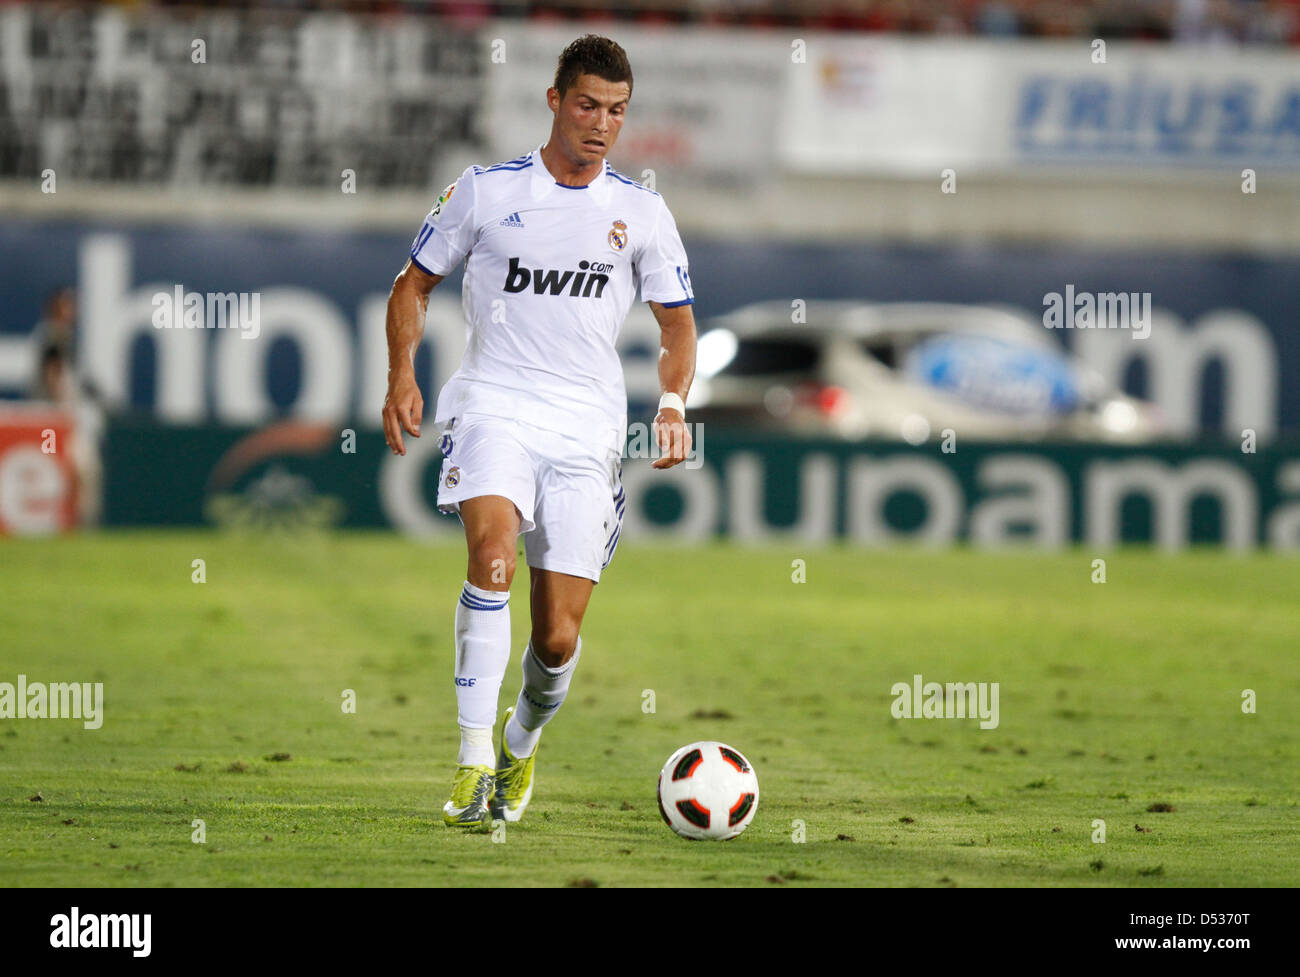 Real Madrid´s soccer player Cristiano Ronaldo controls the ball during a match Stock Photo